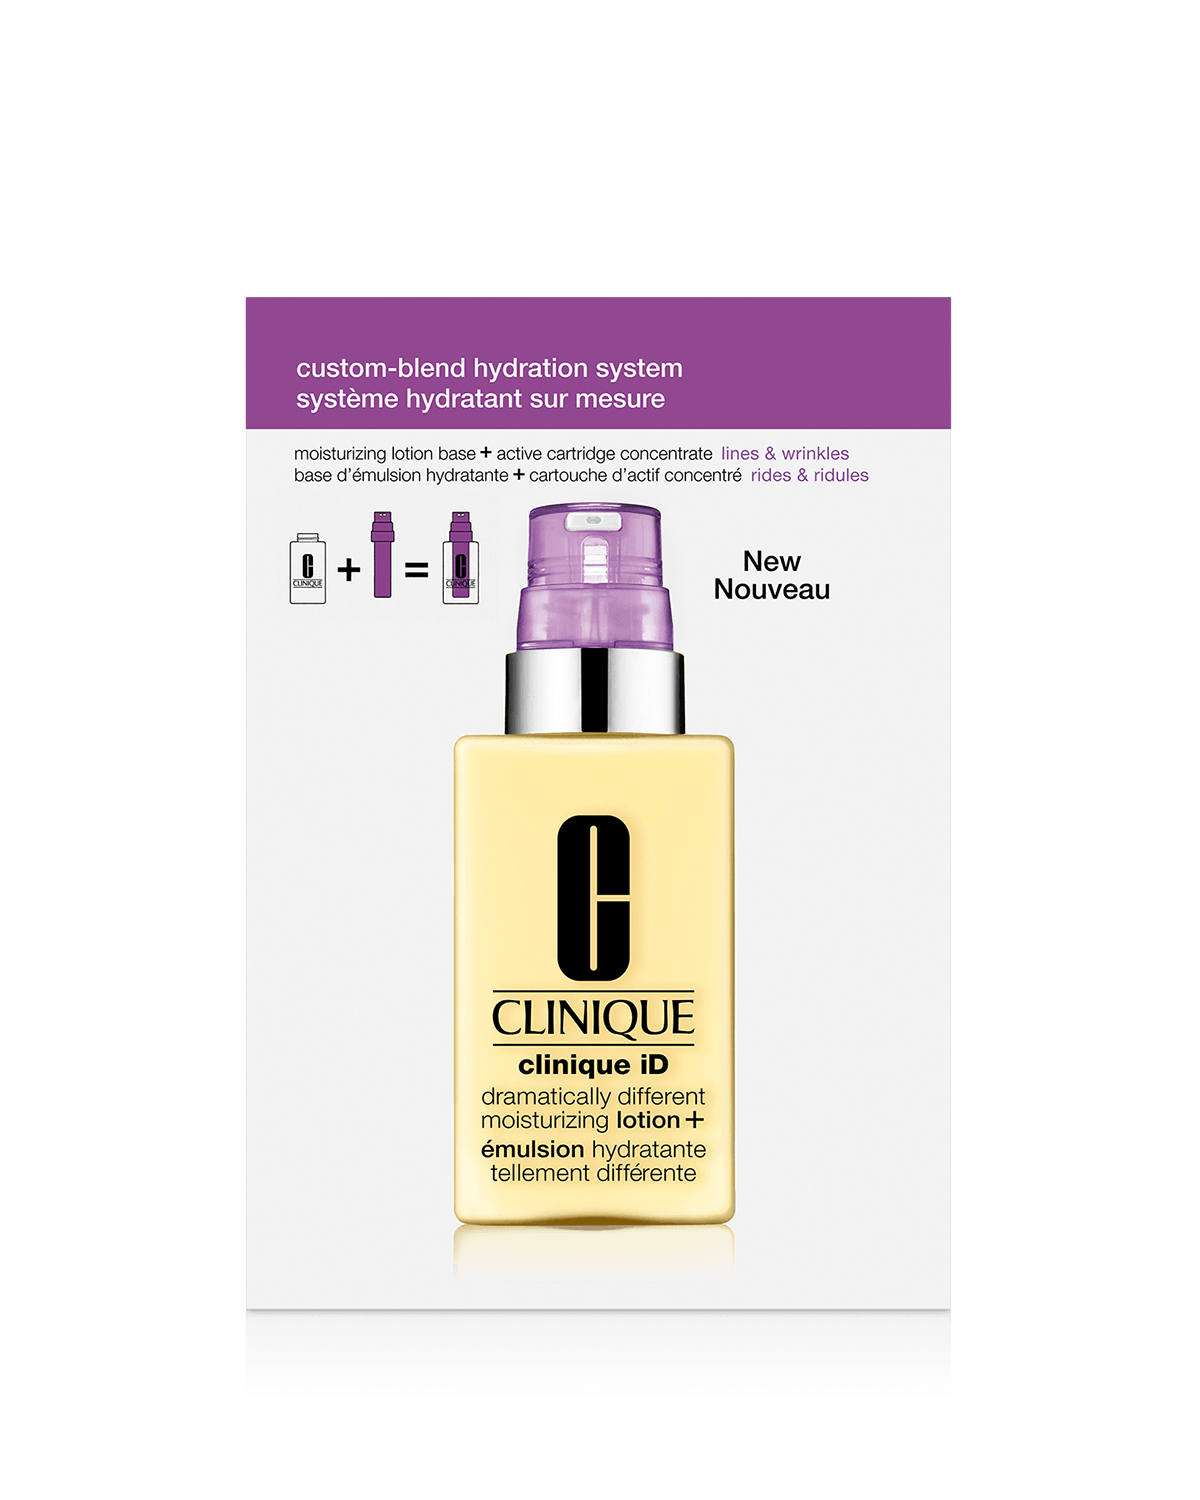 Clinique iD™: Dramatically Different Moisturizing Lotion+™ + Active Cartridge Concentrate for Lines & Wrinkles Packette